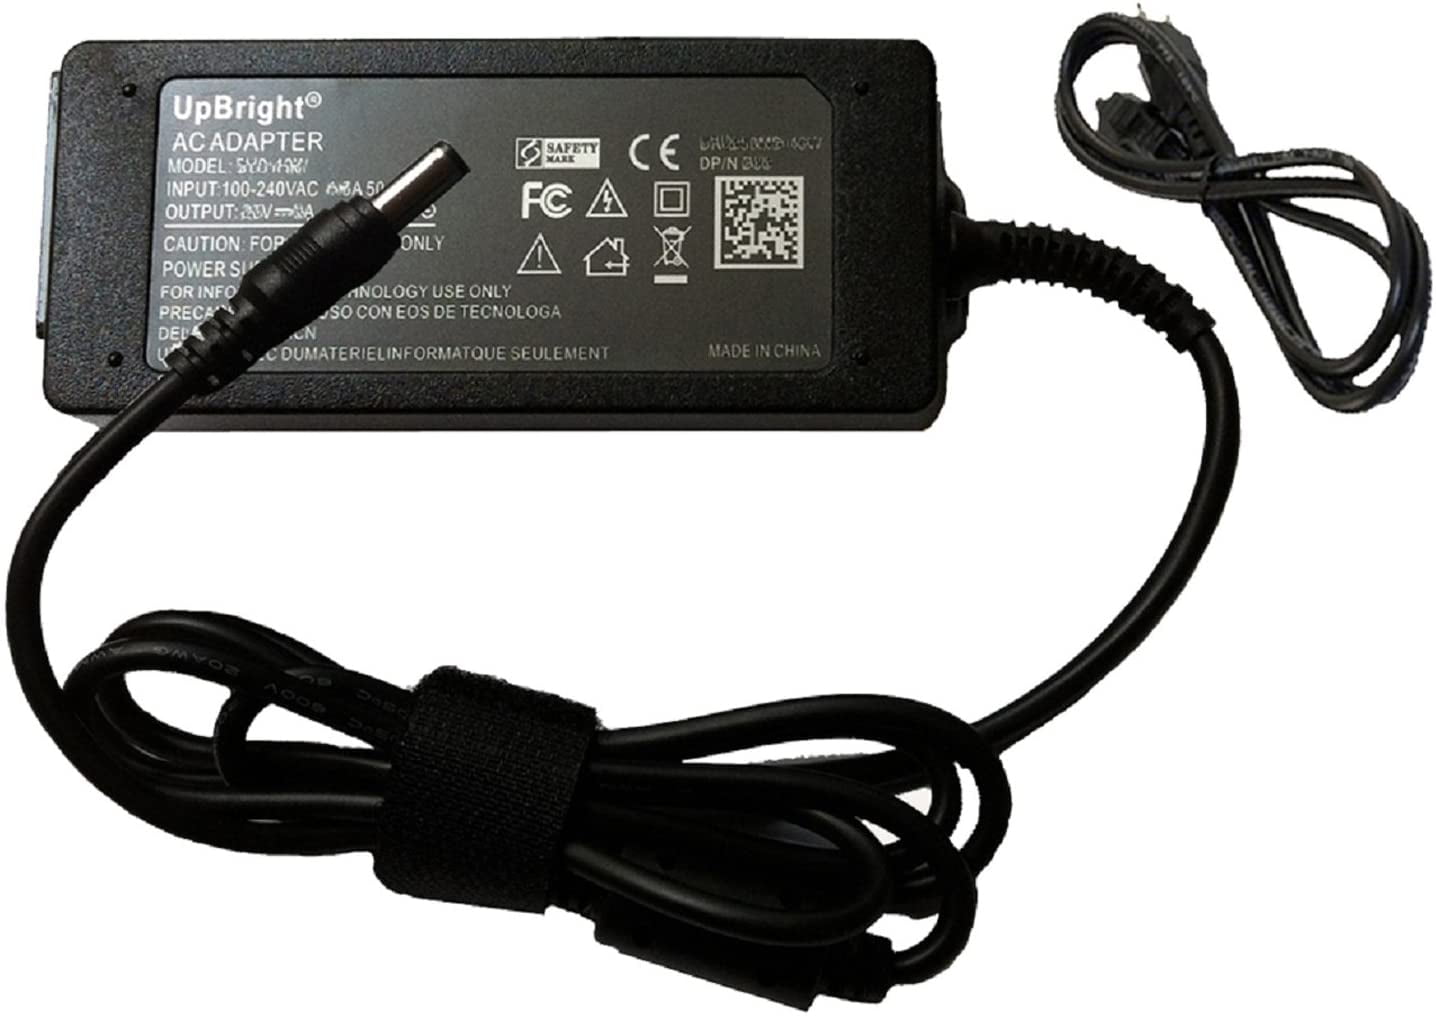 New AC Adapter Charger Power Supply For HP OfficeJet 6110 6150 6110xi Printer 